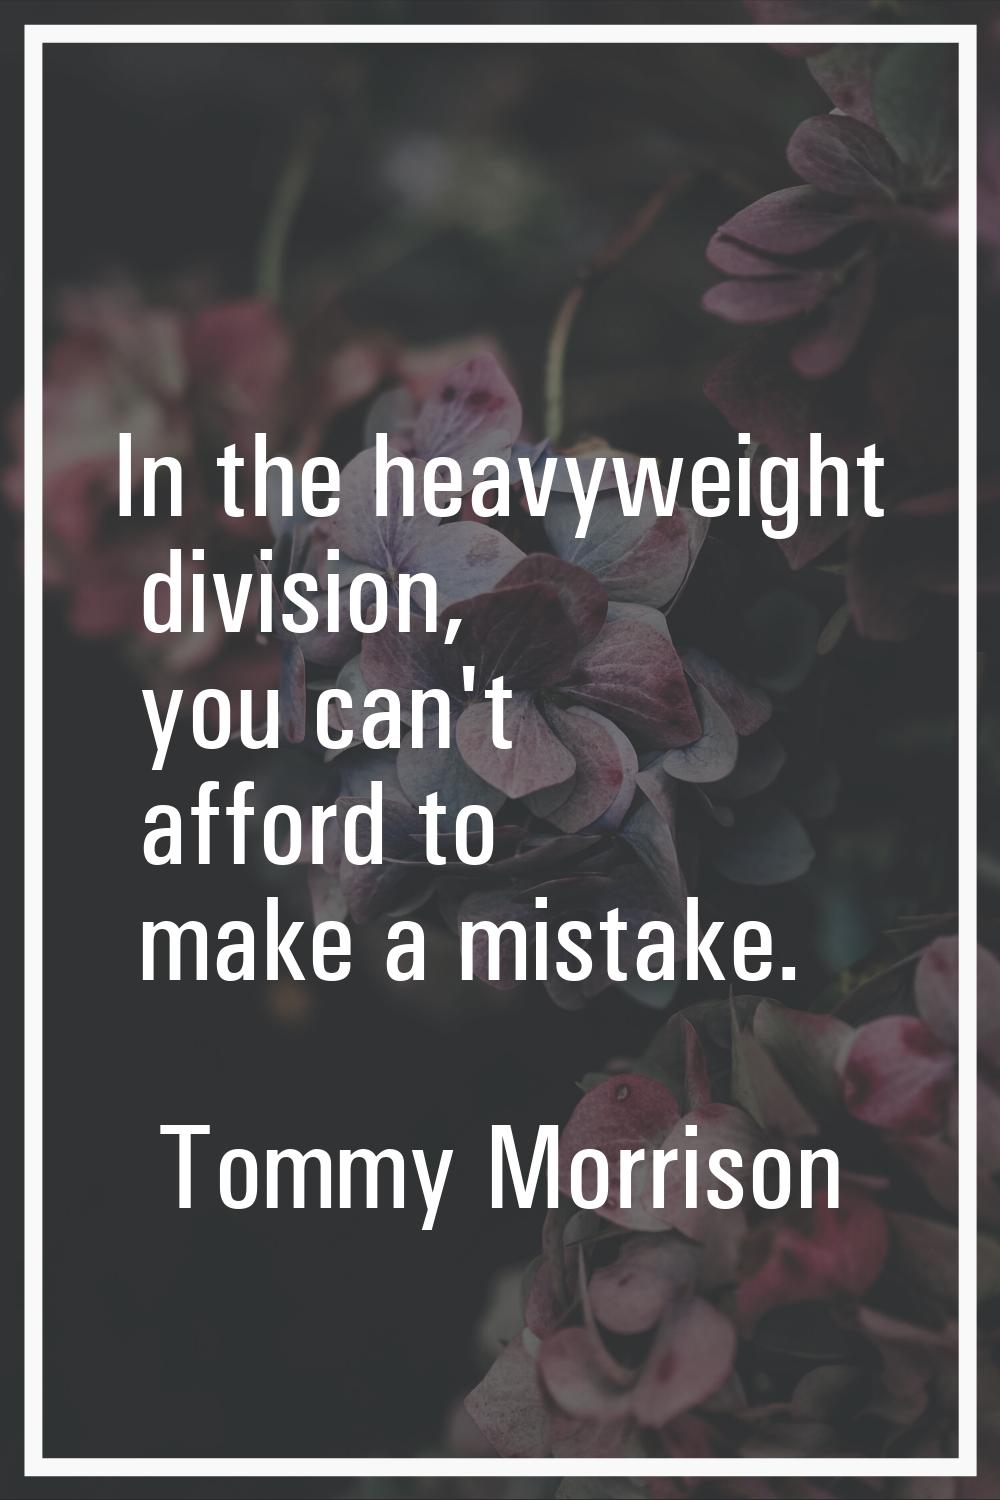 In the heavyweight division, you can't afford to make a mistake.